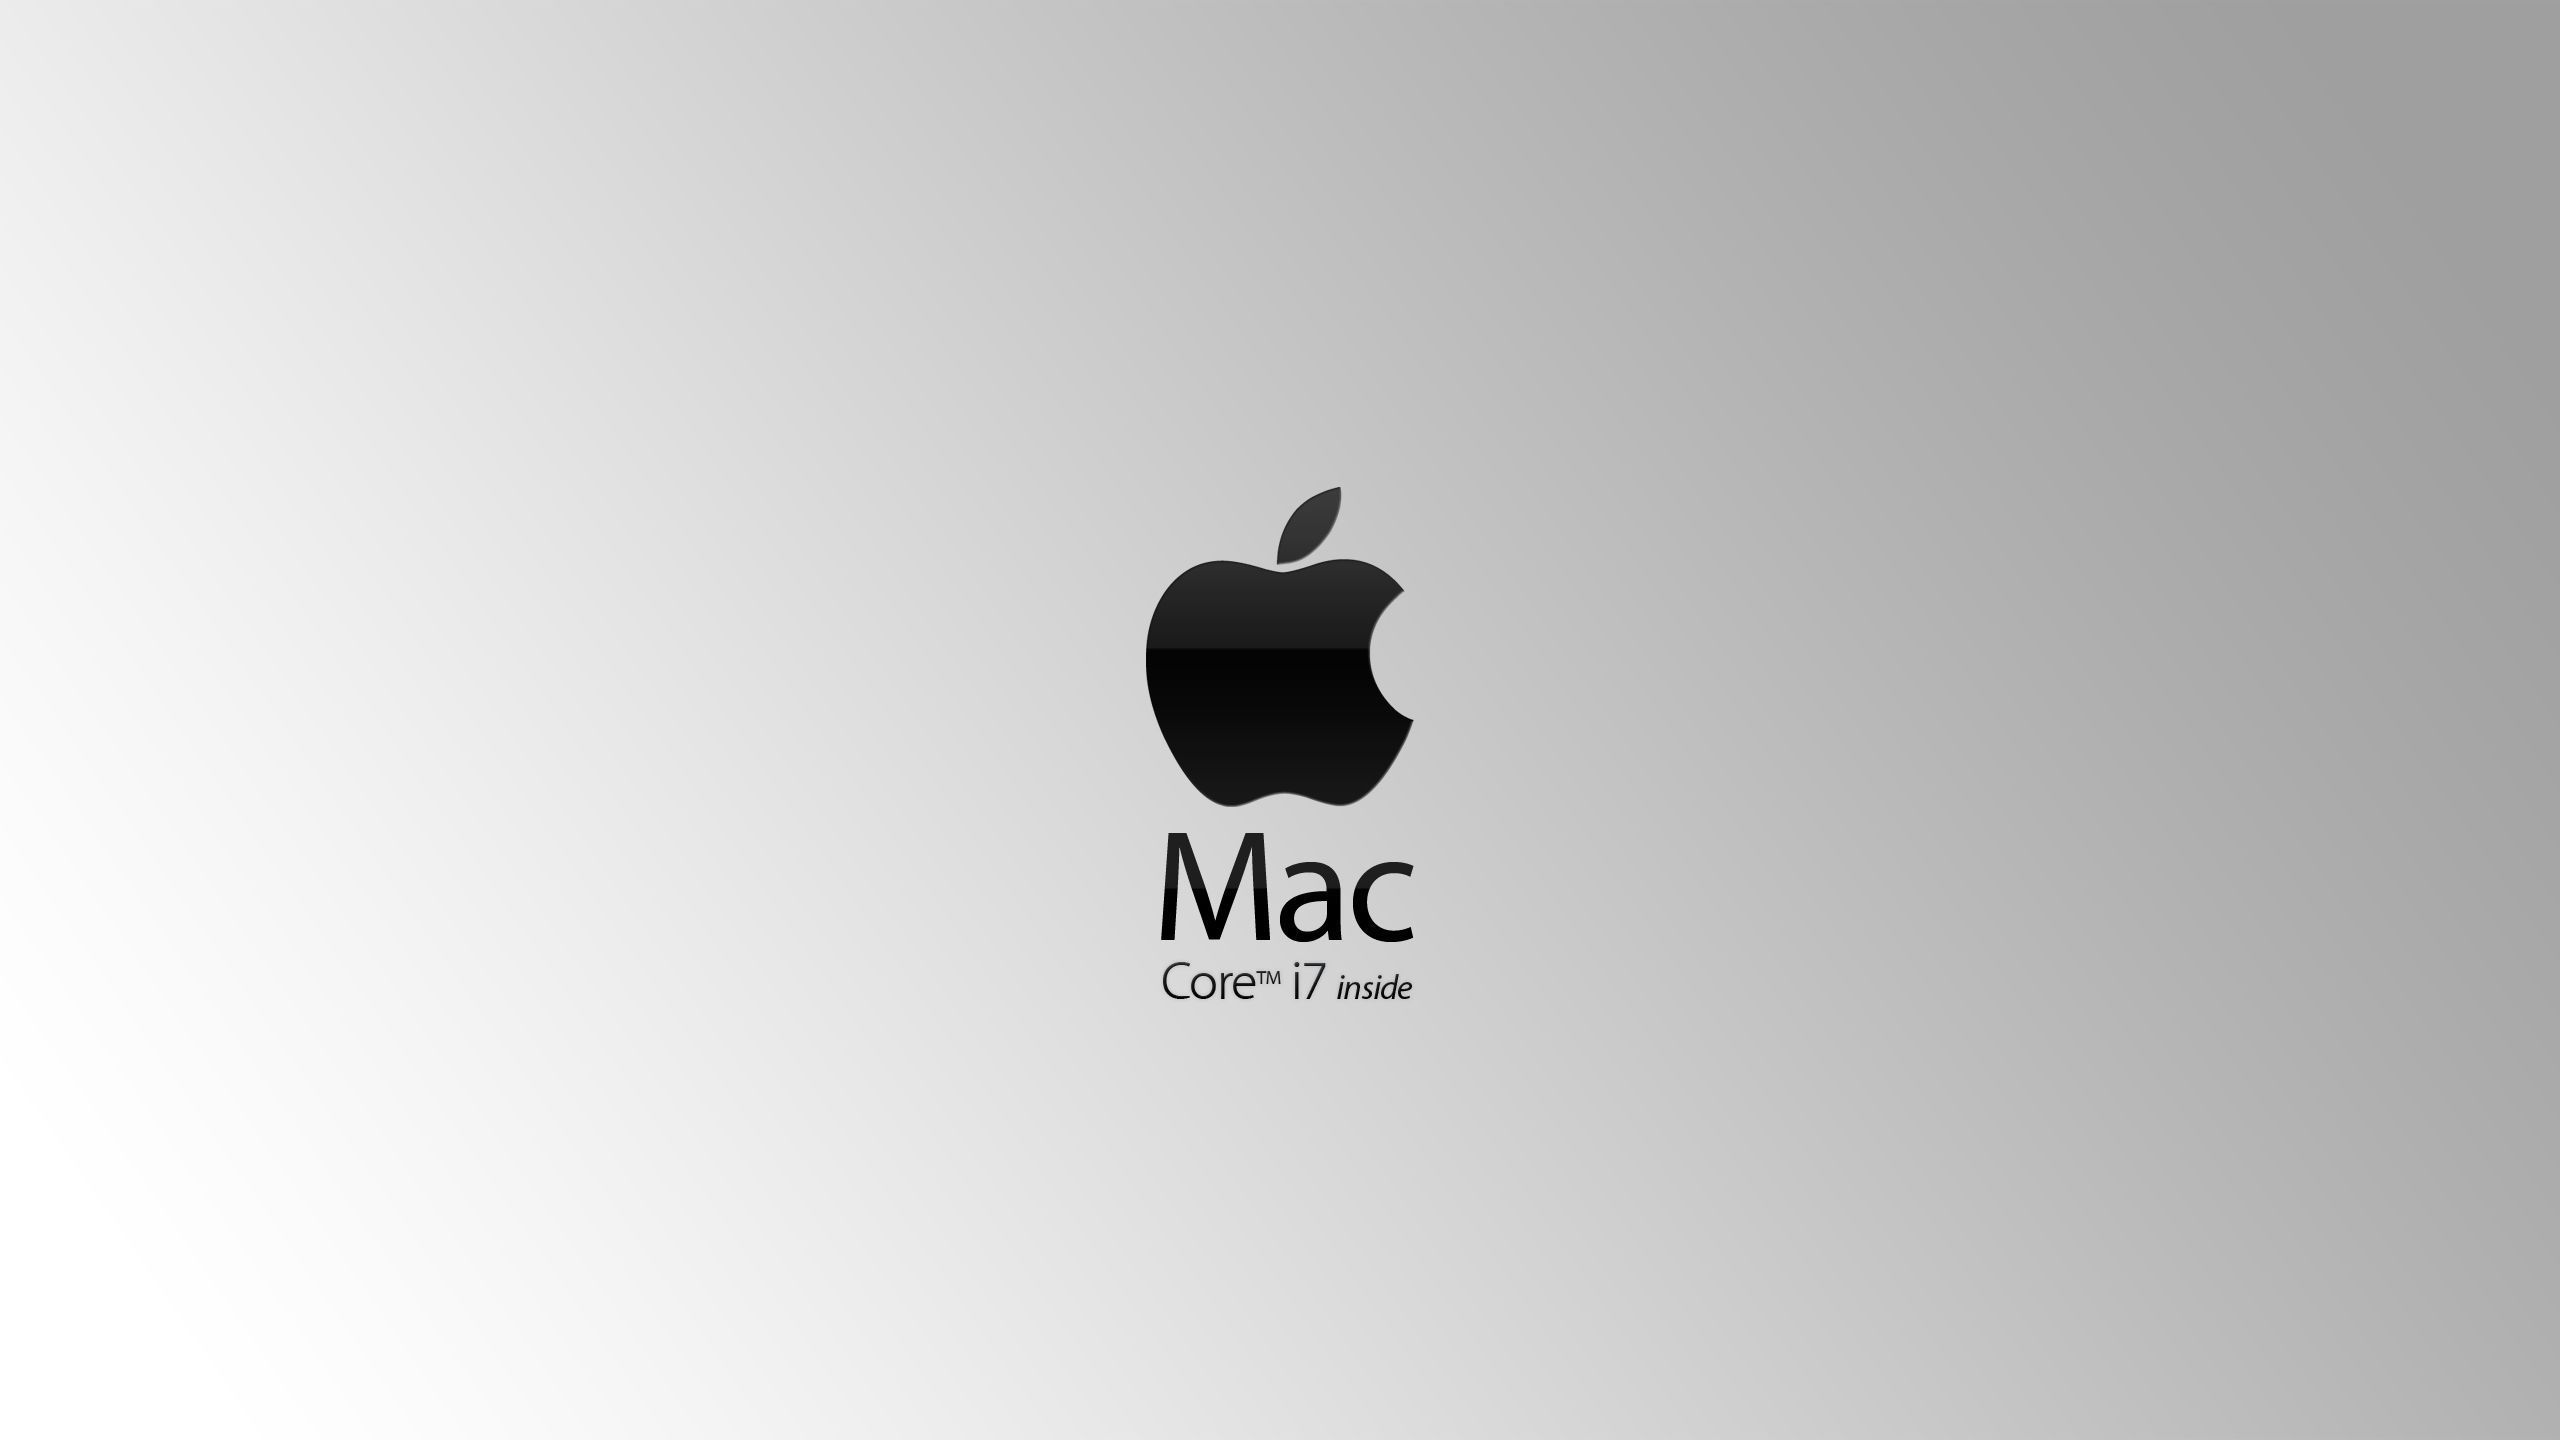 Mac Awesome Wallpapers